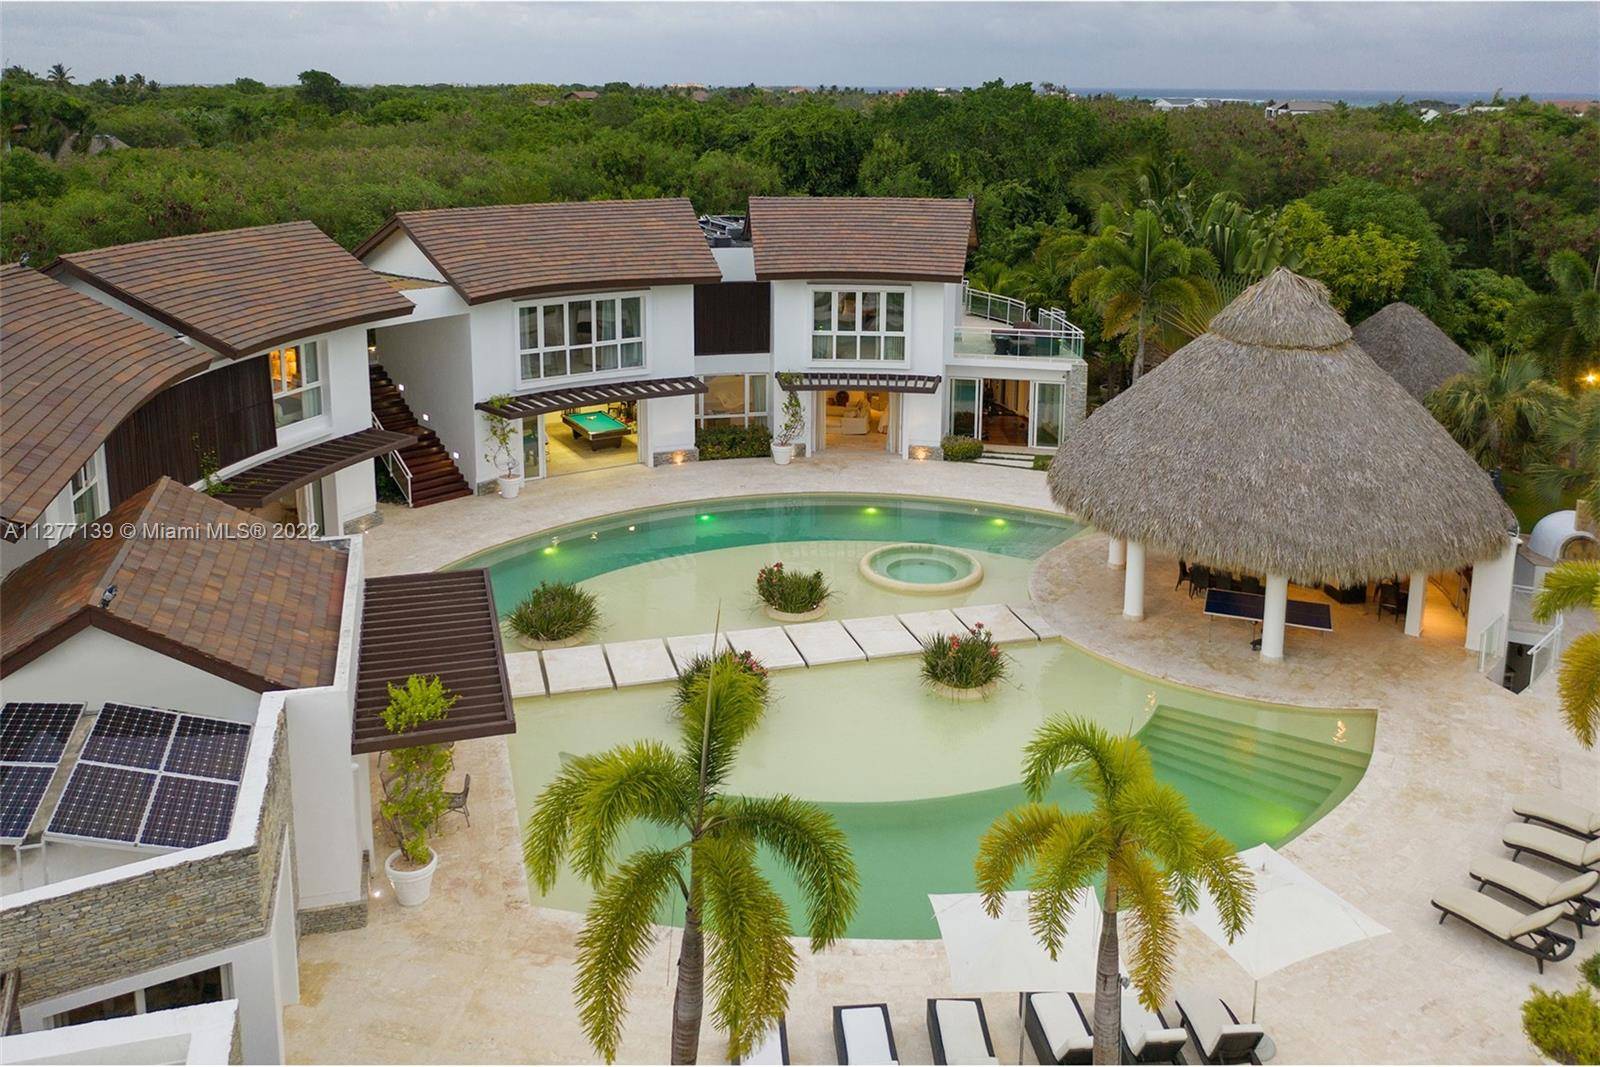 Luxury Property in the best area of Punta Cana without compromising on the views, services, calmness and tranquillity.